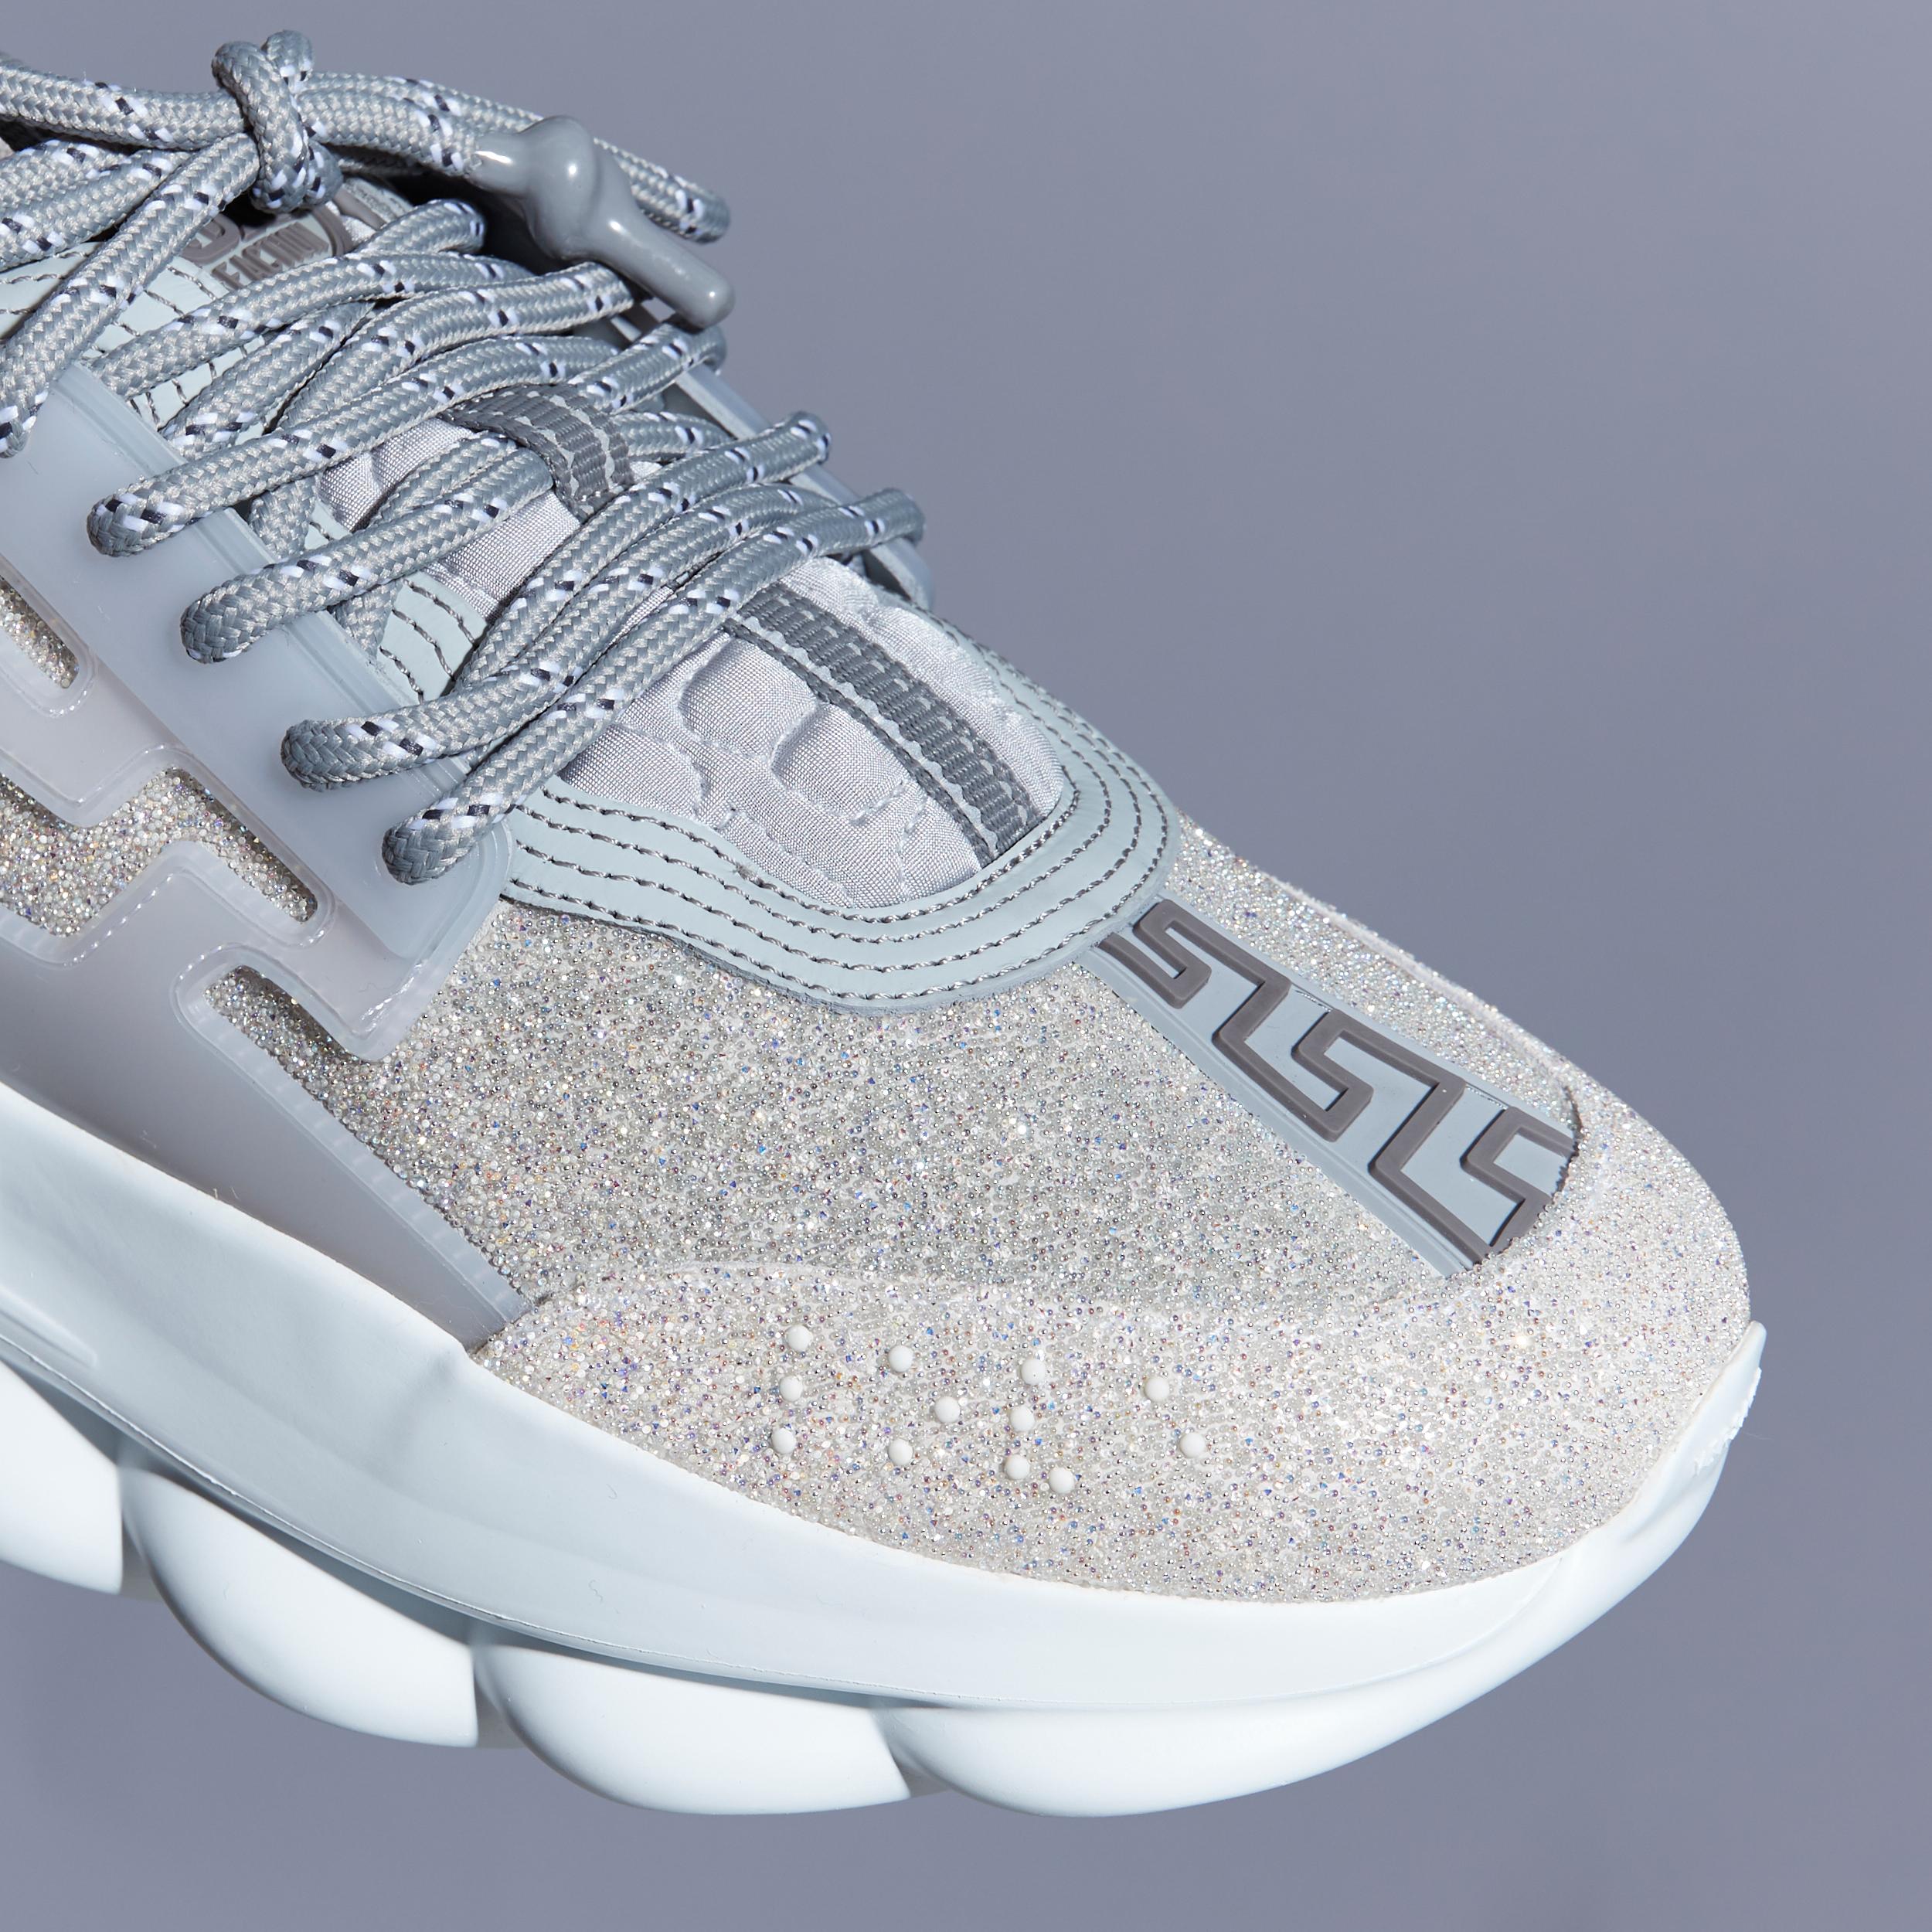 new VERSACE Chain Reaction Reflective Silver Crystal Rhinestone sneaker EU40 US7 For Sale 1